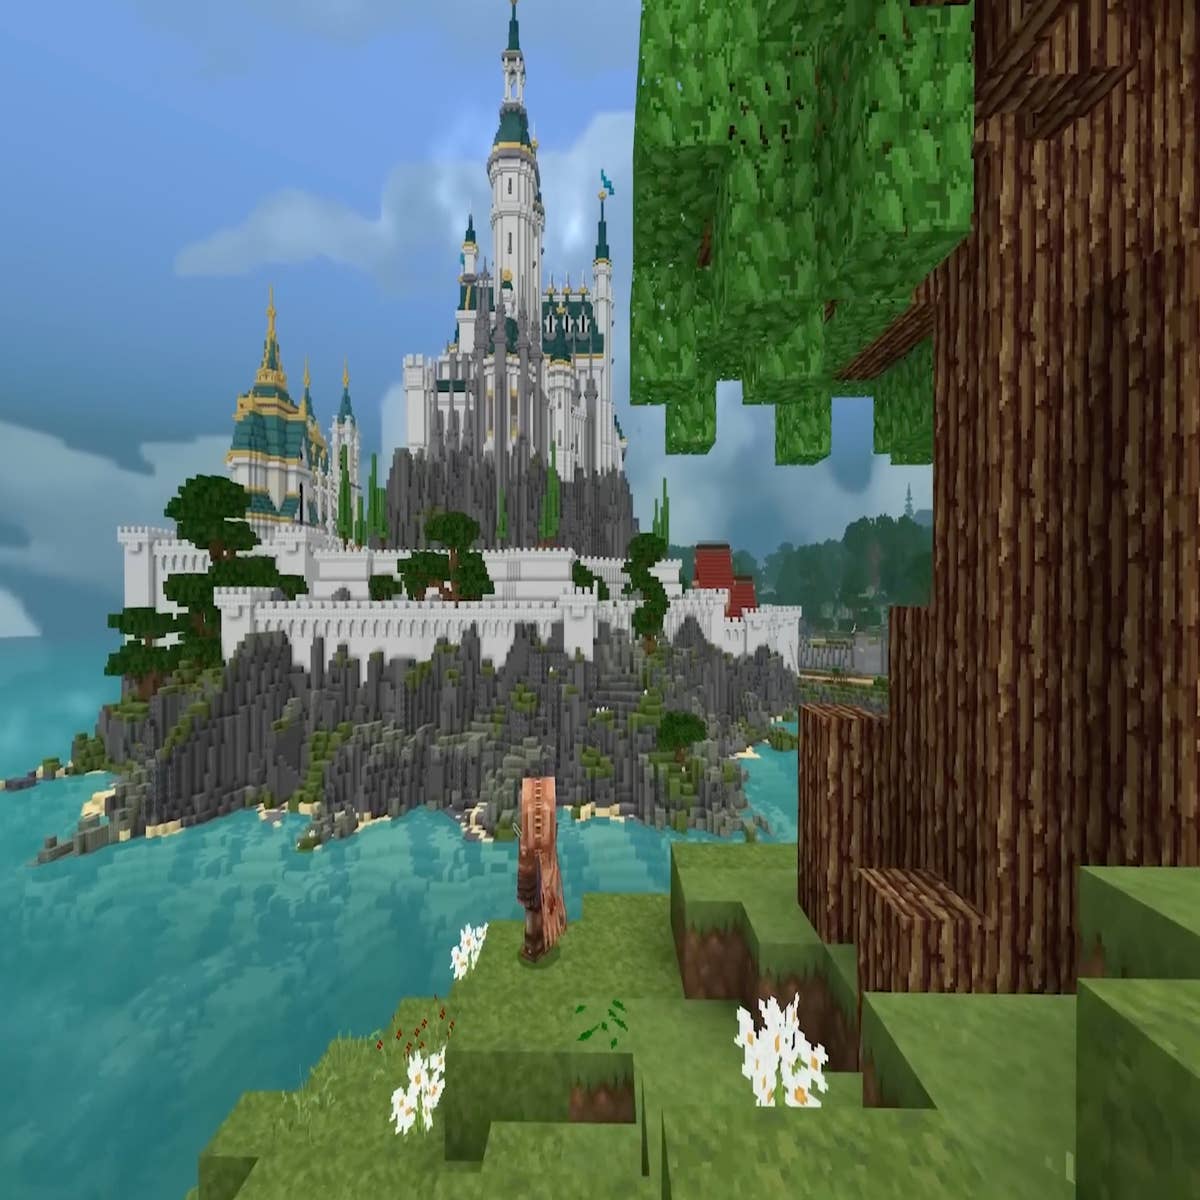 Remade a castle I built in minecraft classic! Second photo is the